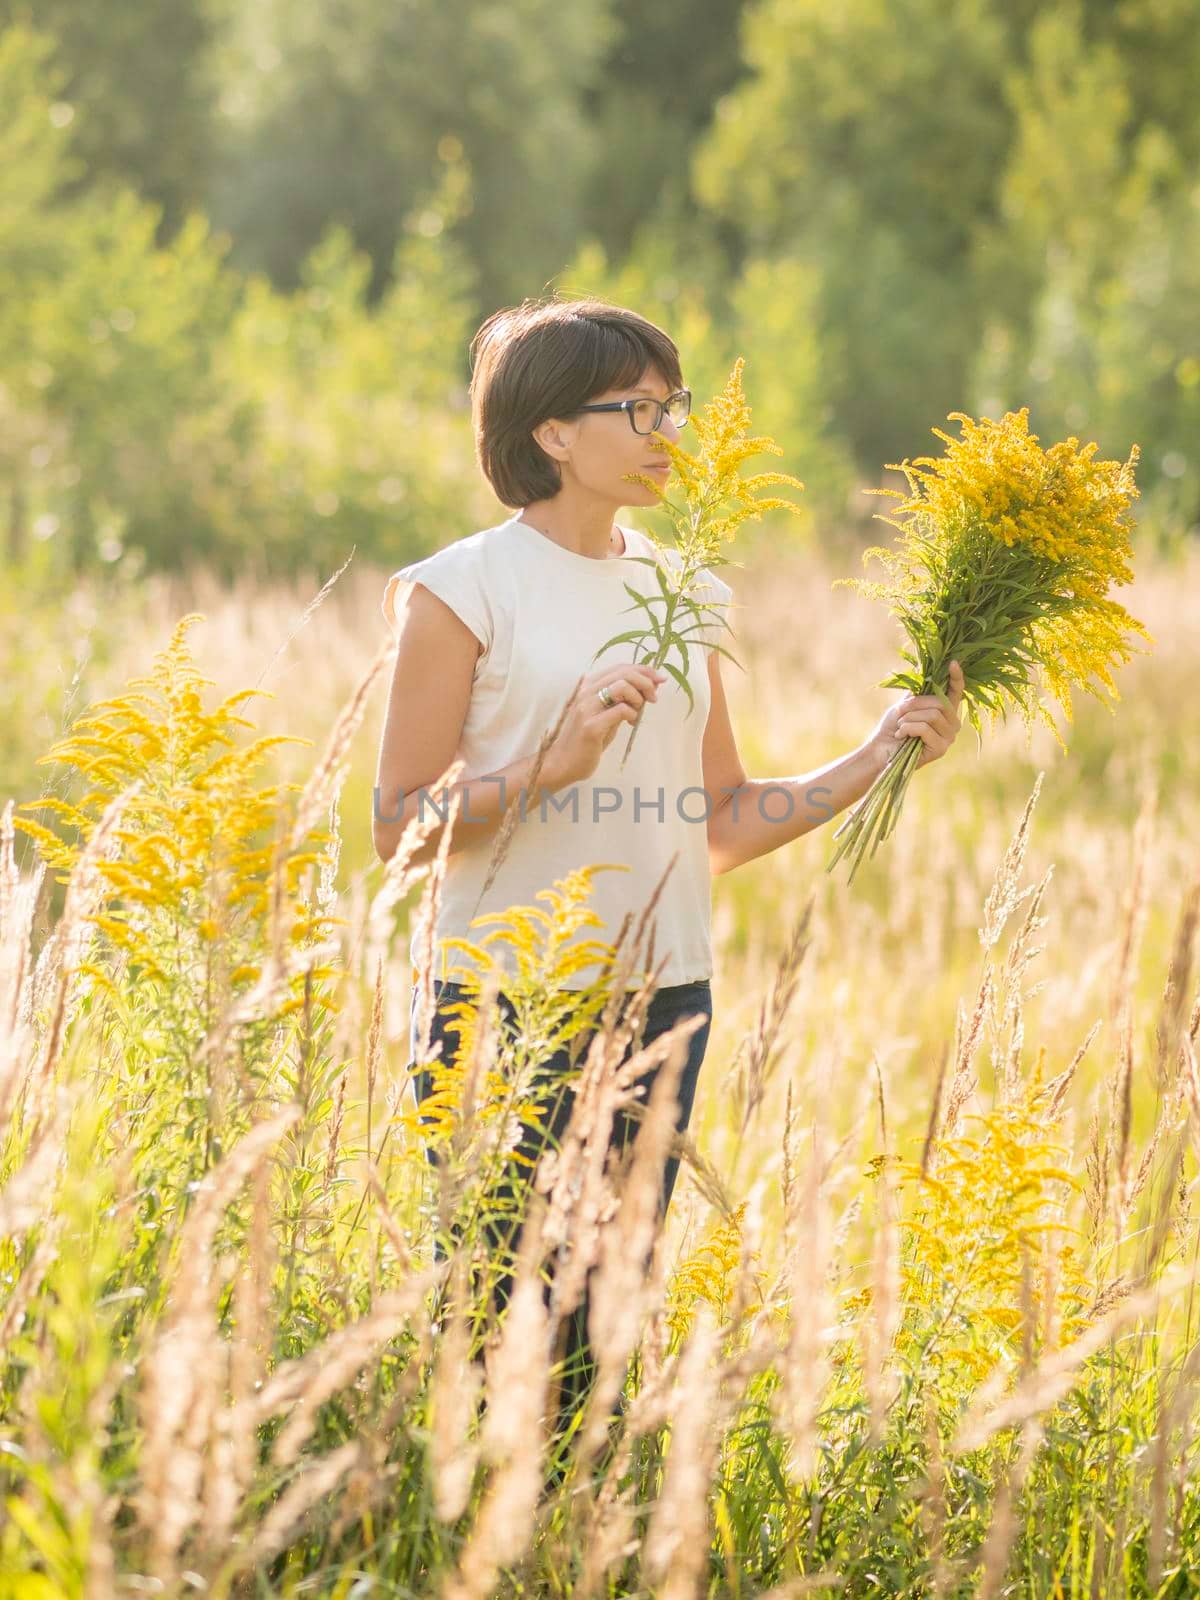 Woman is picking Solidago, commonly called goldenrods, on autumn field. Florist at work. Using yellow flowers as decorative bouquet for home interior.